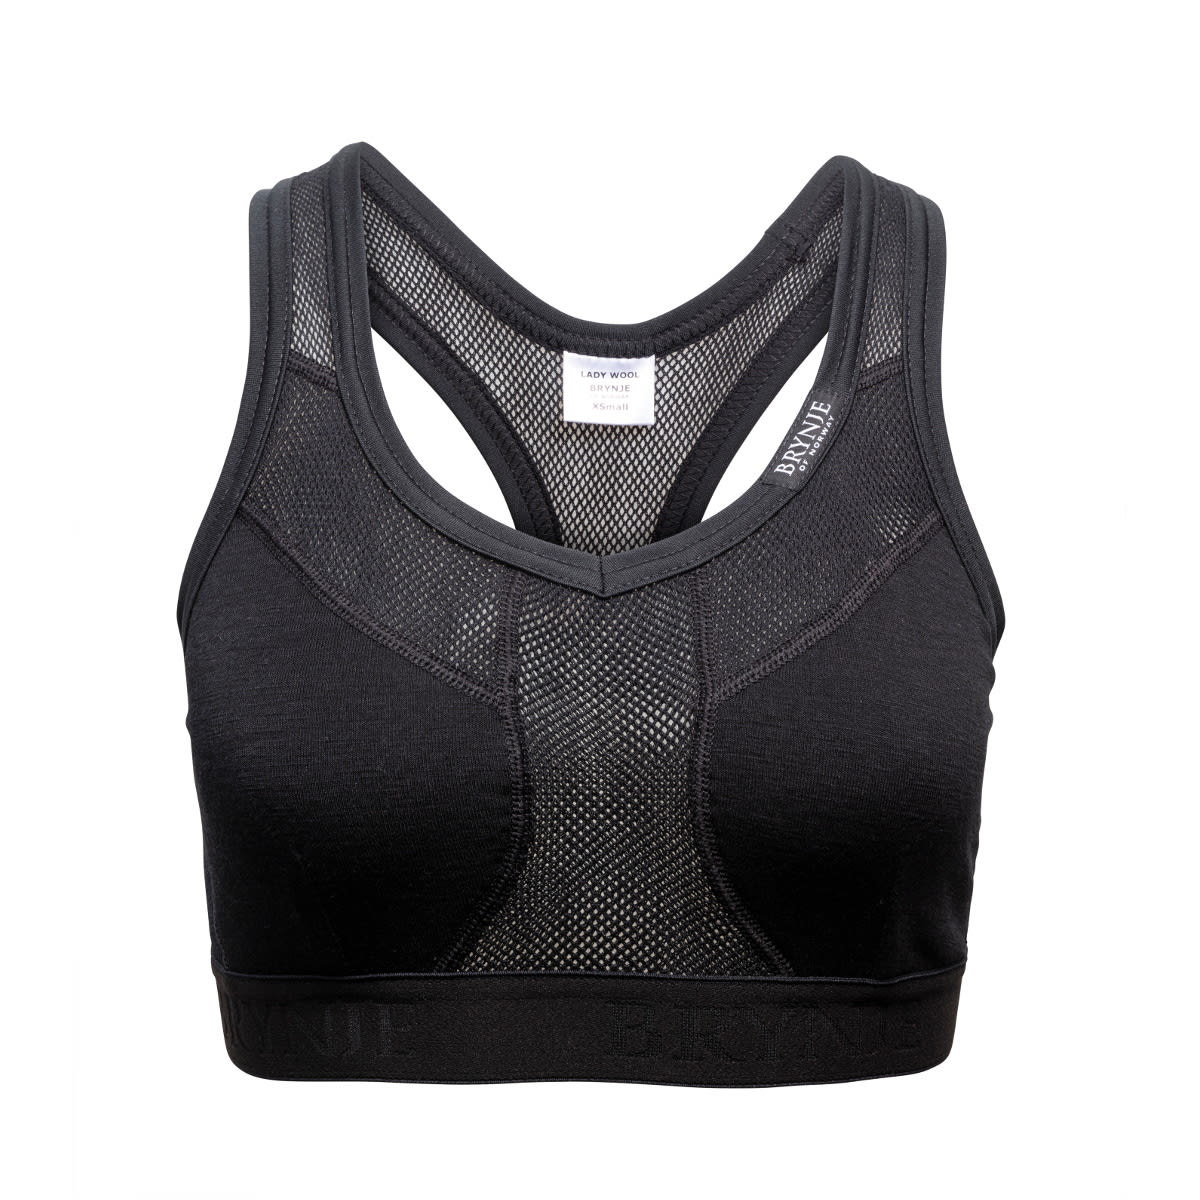 Buy Brynje Women's Wool Sports Top from Outnorth